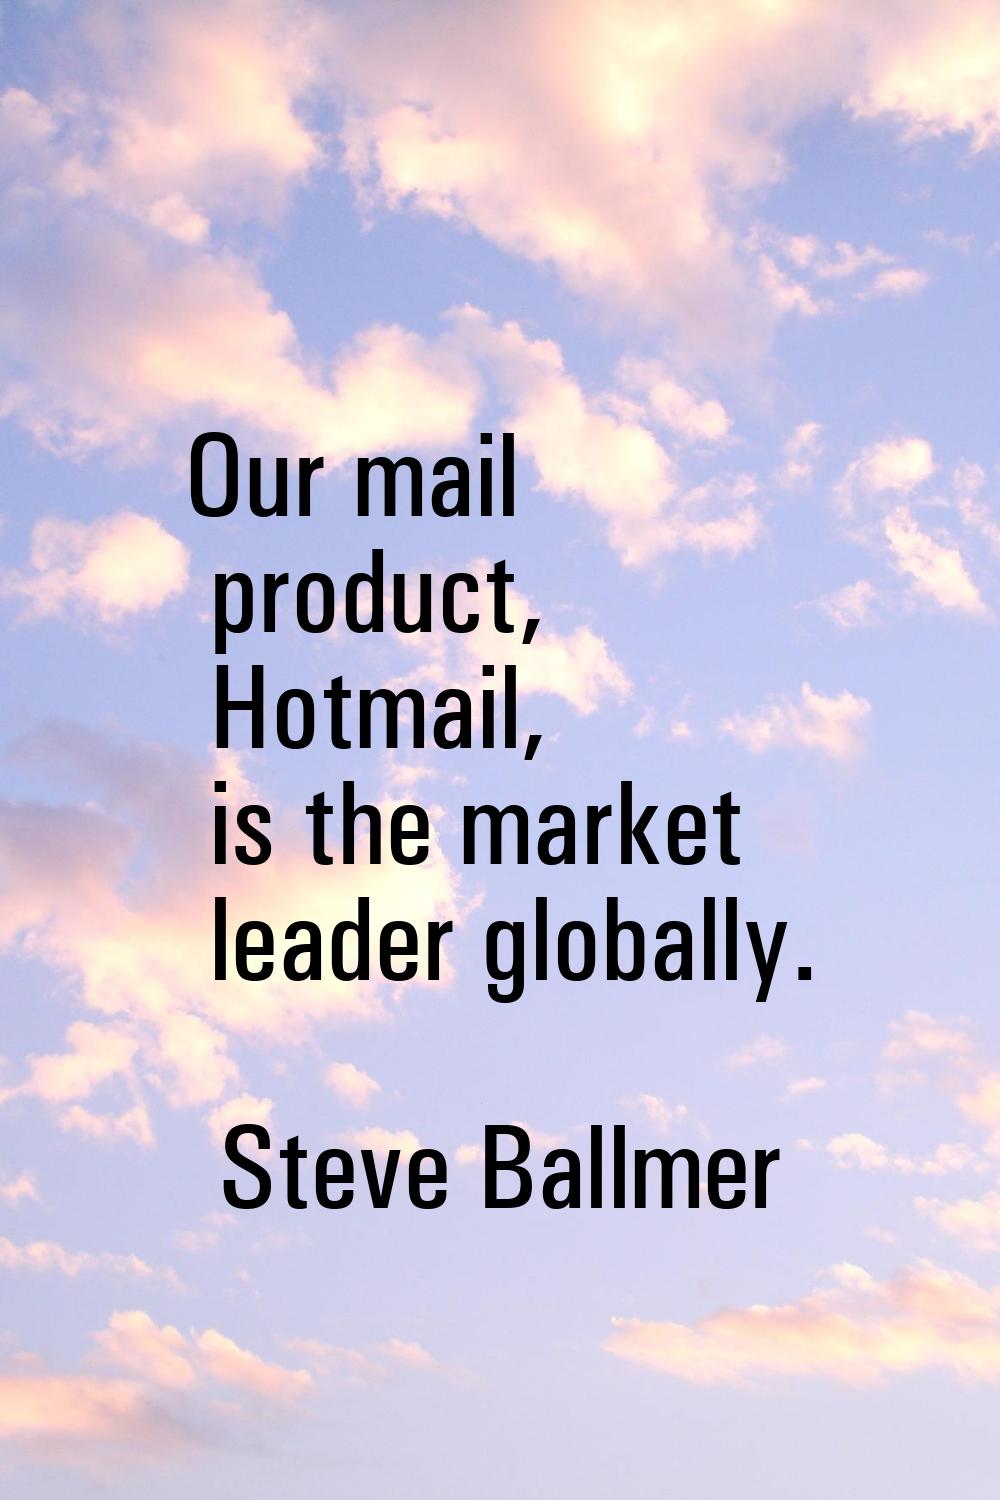 Our mail product, Hotmail, is the market leader globally.